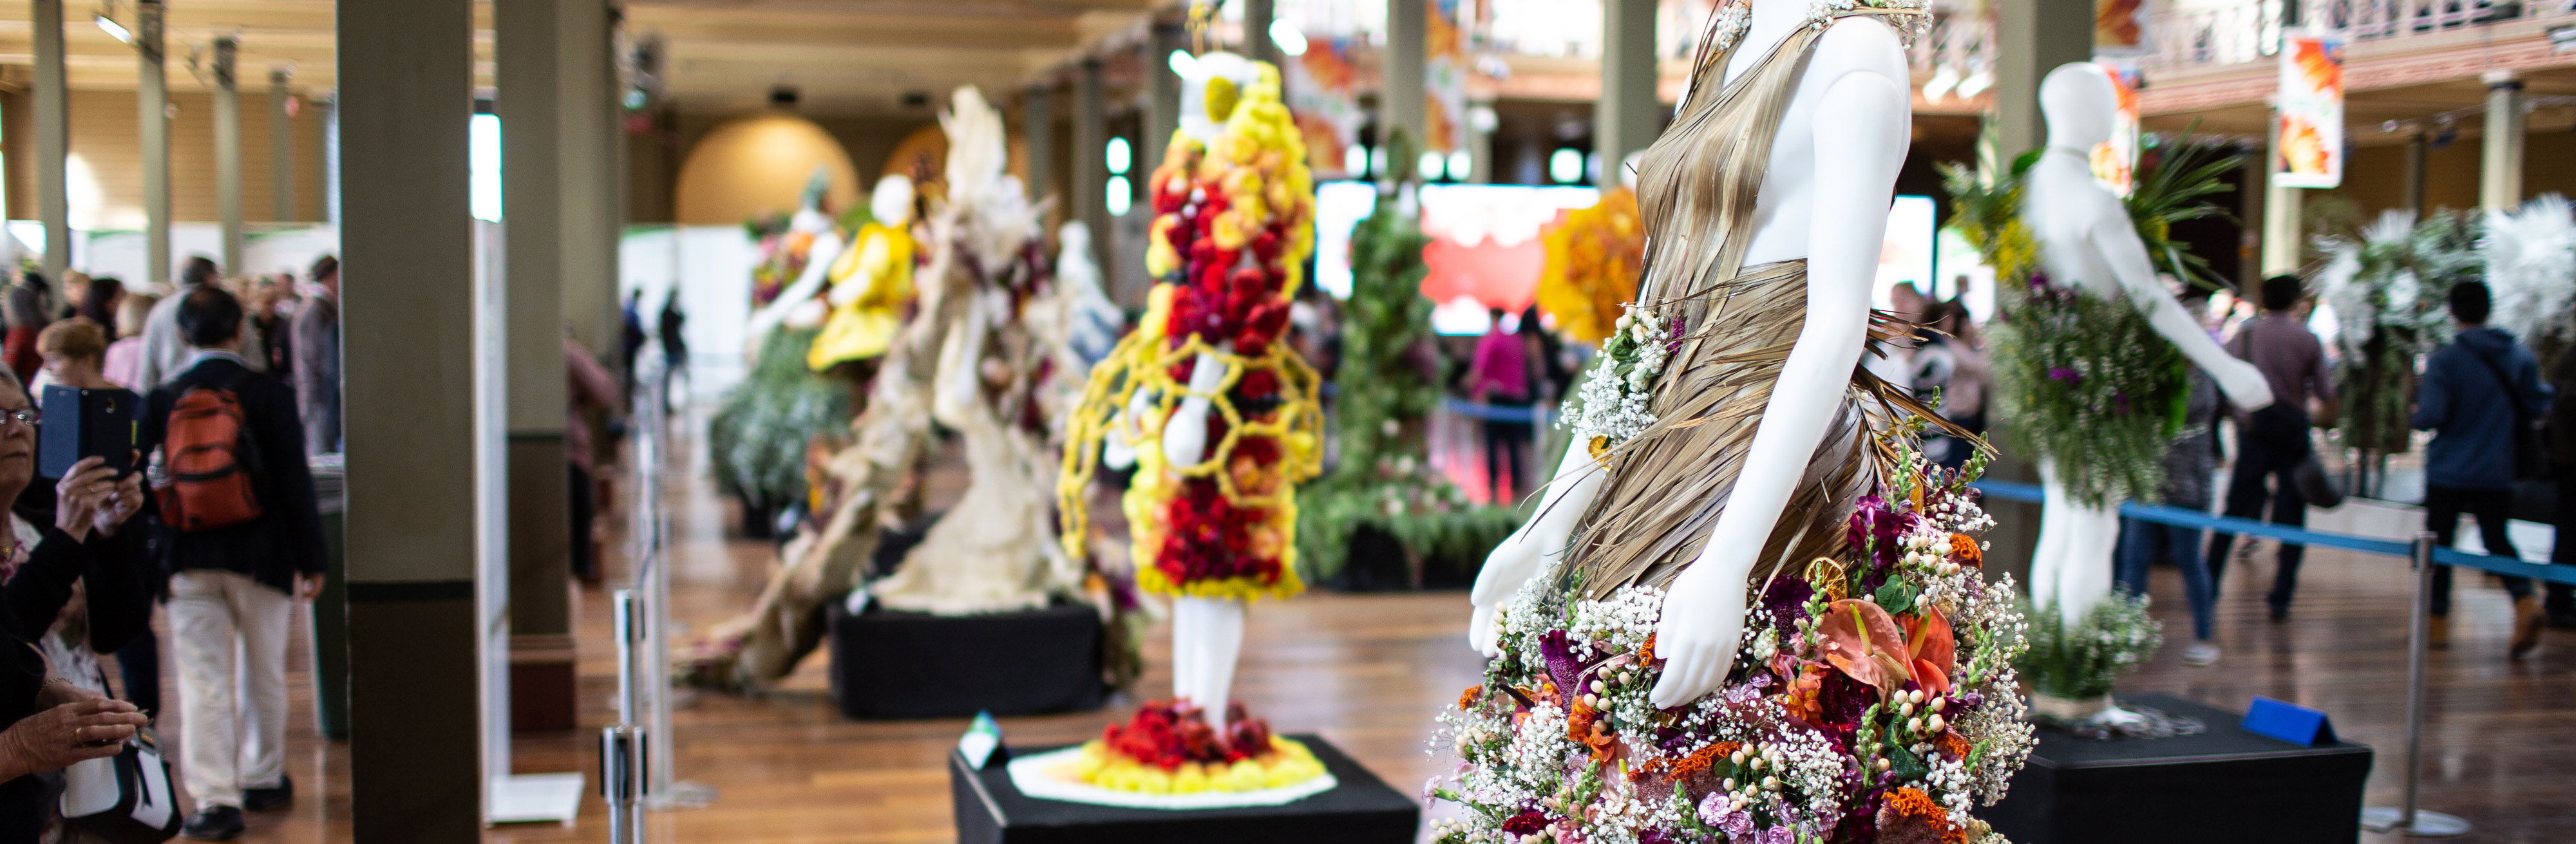 flower power: floral fashion at melbourne flower and garden show